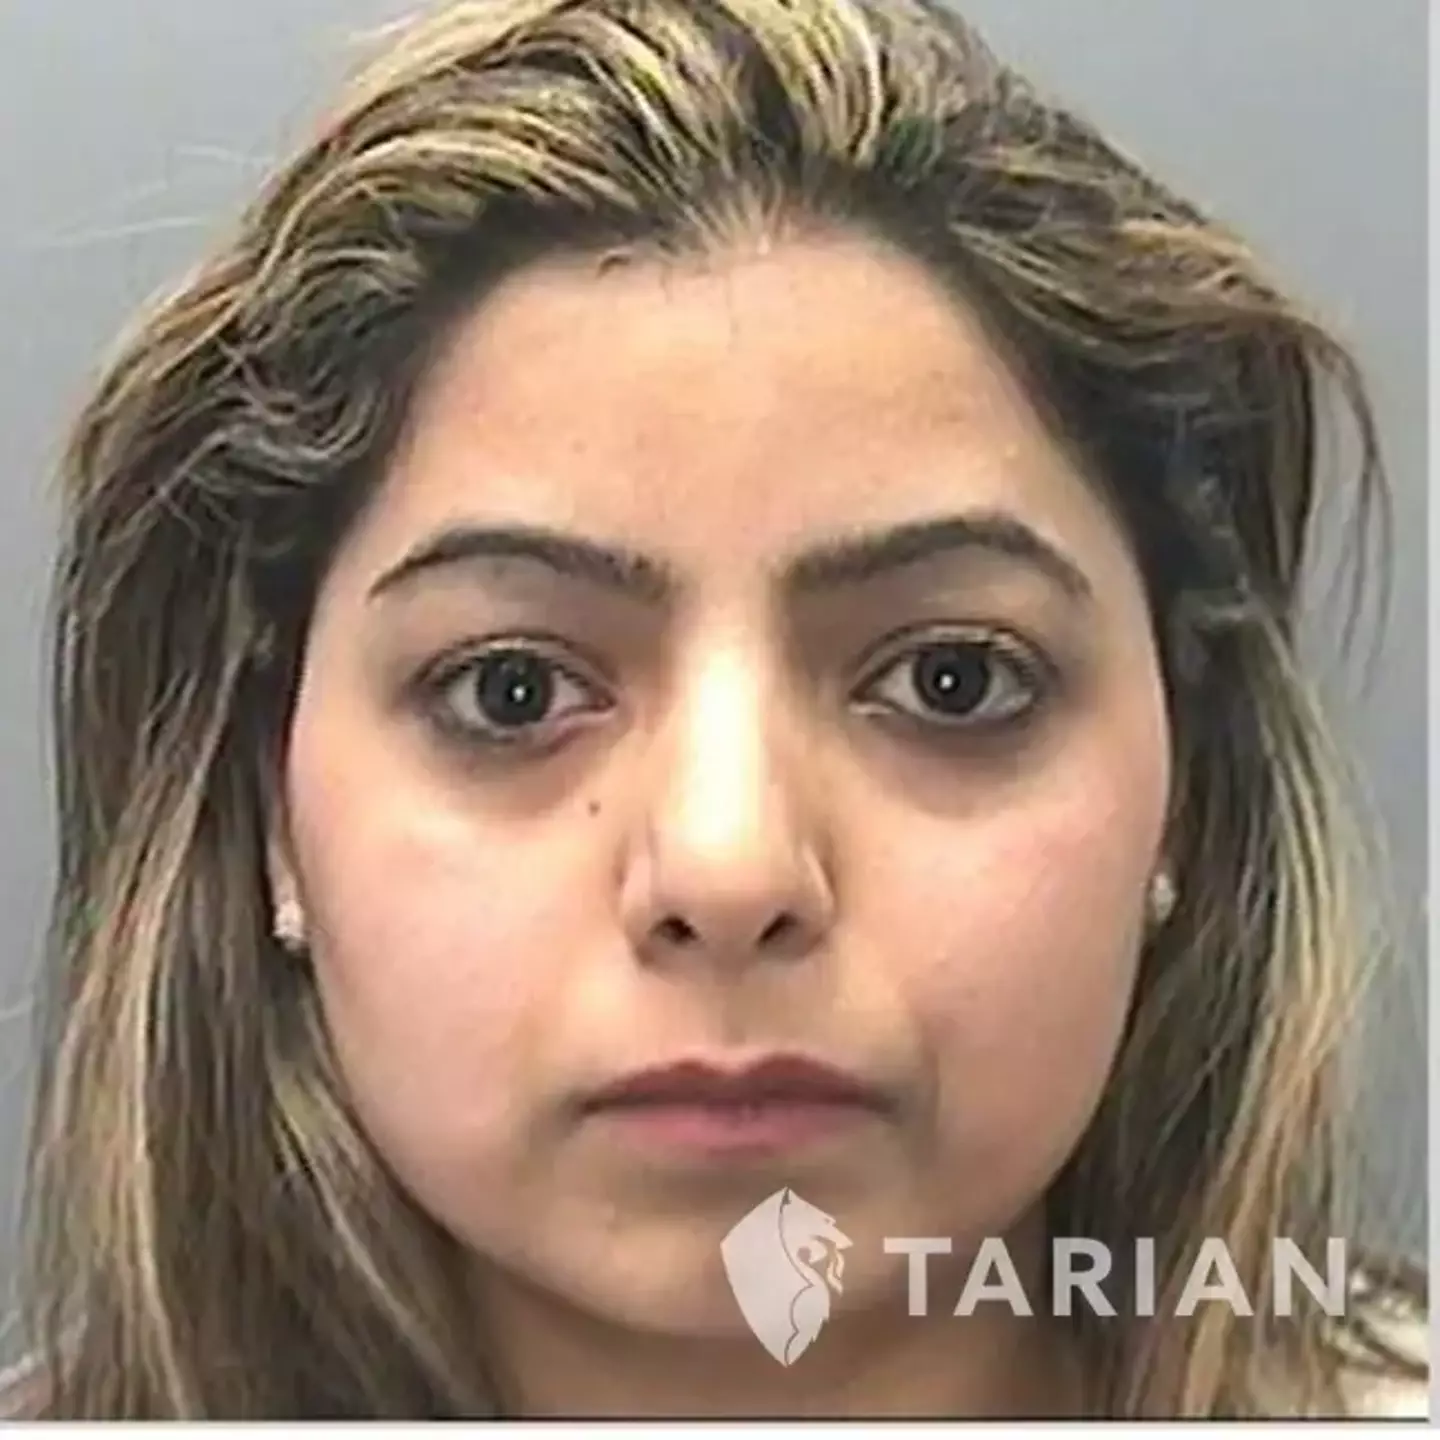 Inderjeet Kaur was jailed for taking driving tests for other people.